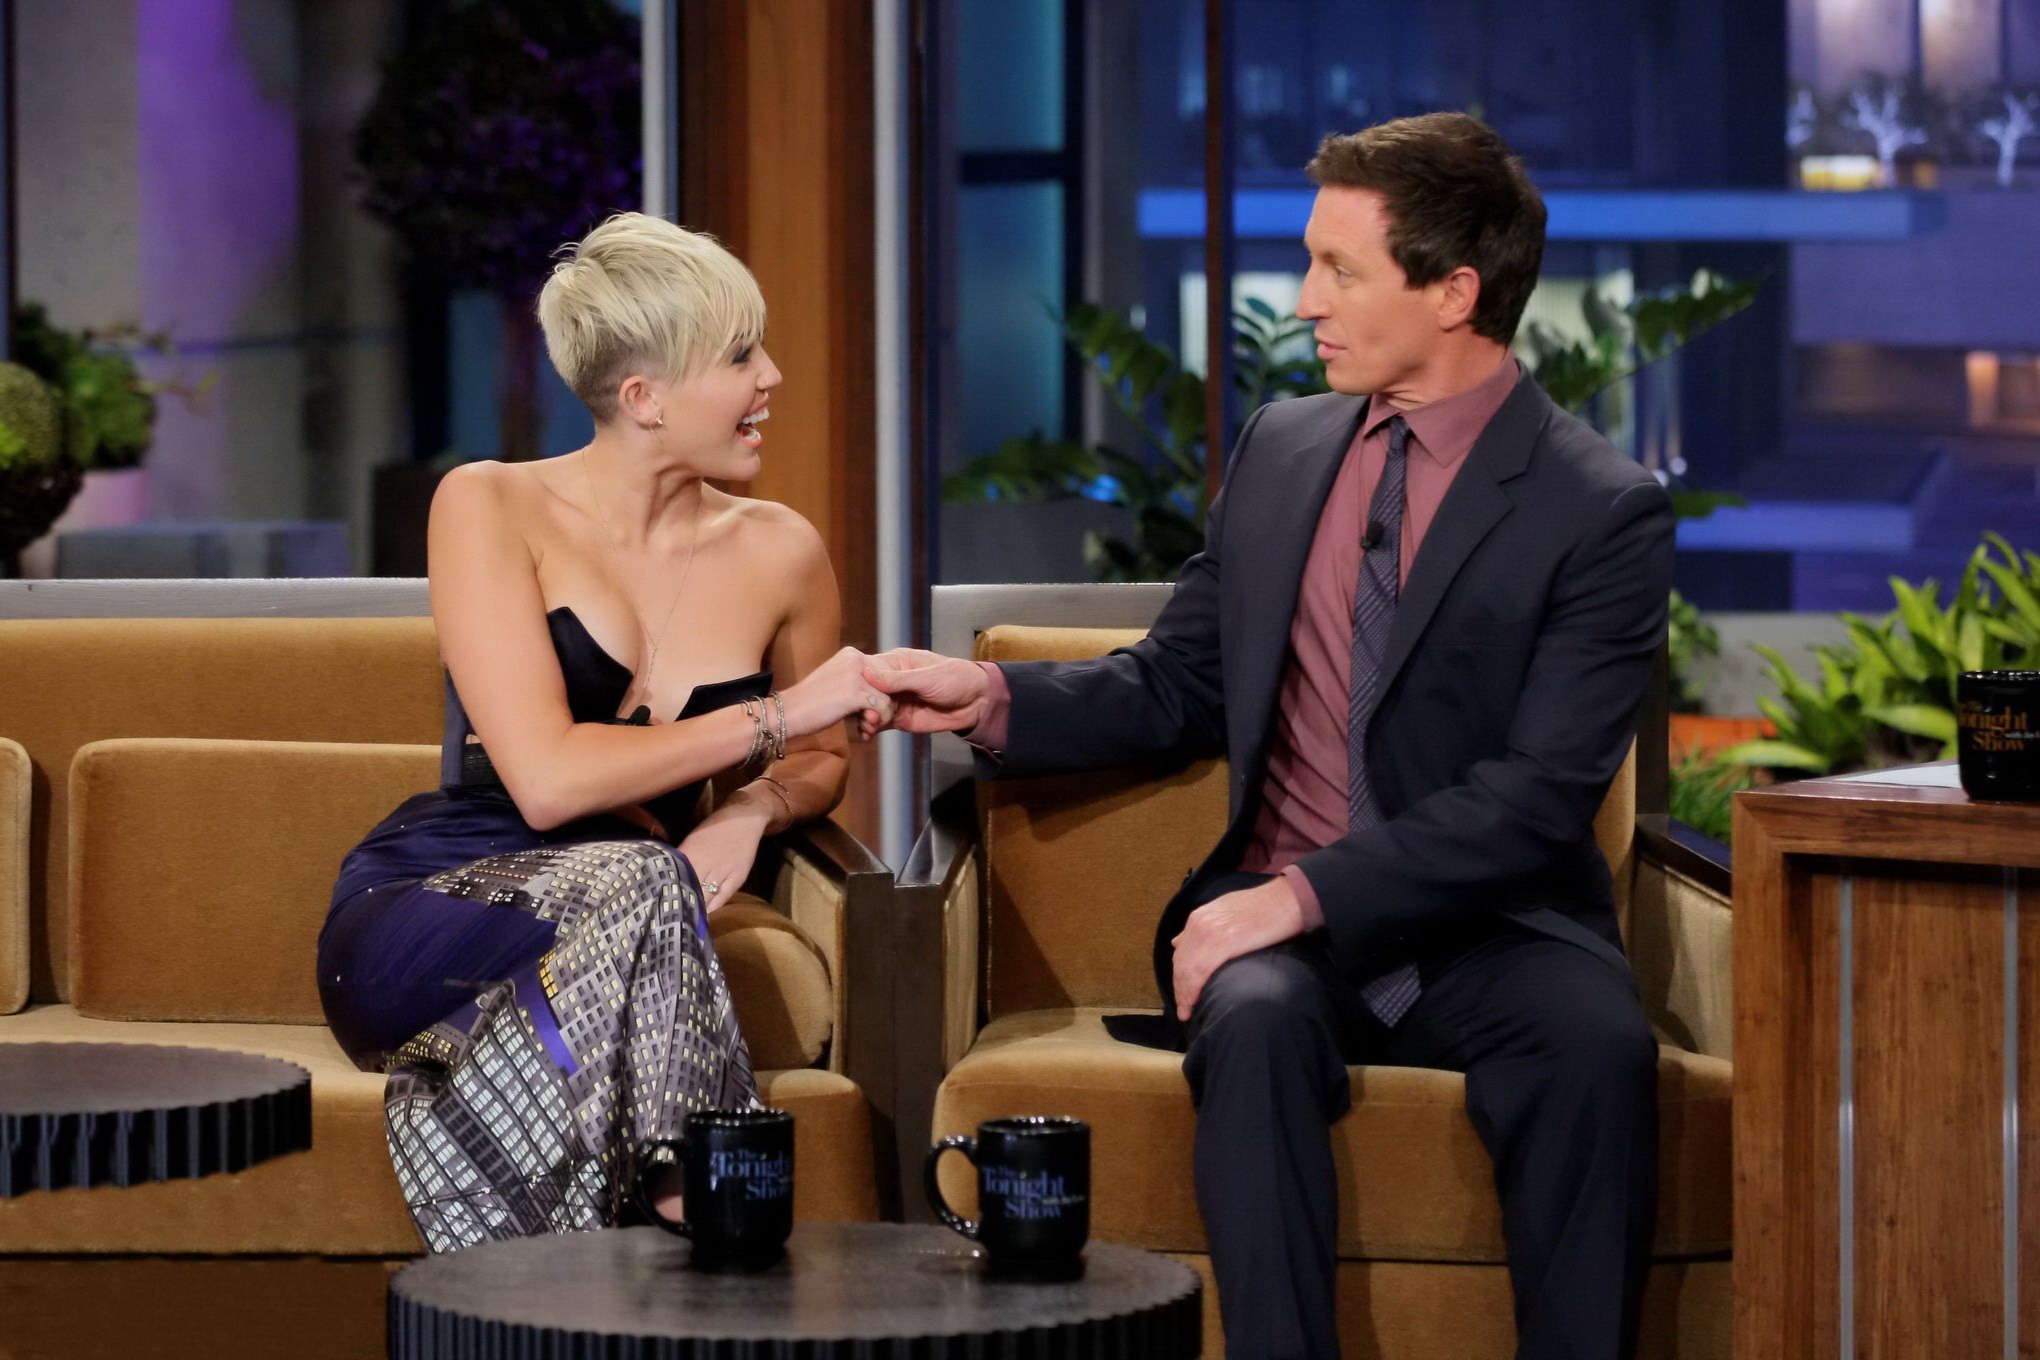 Miley Cyrus braless wears very revealing dress on The Tonight Show with Jay Leno #75250753